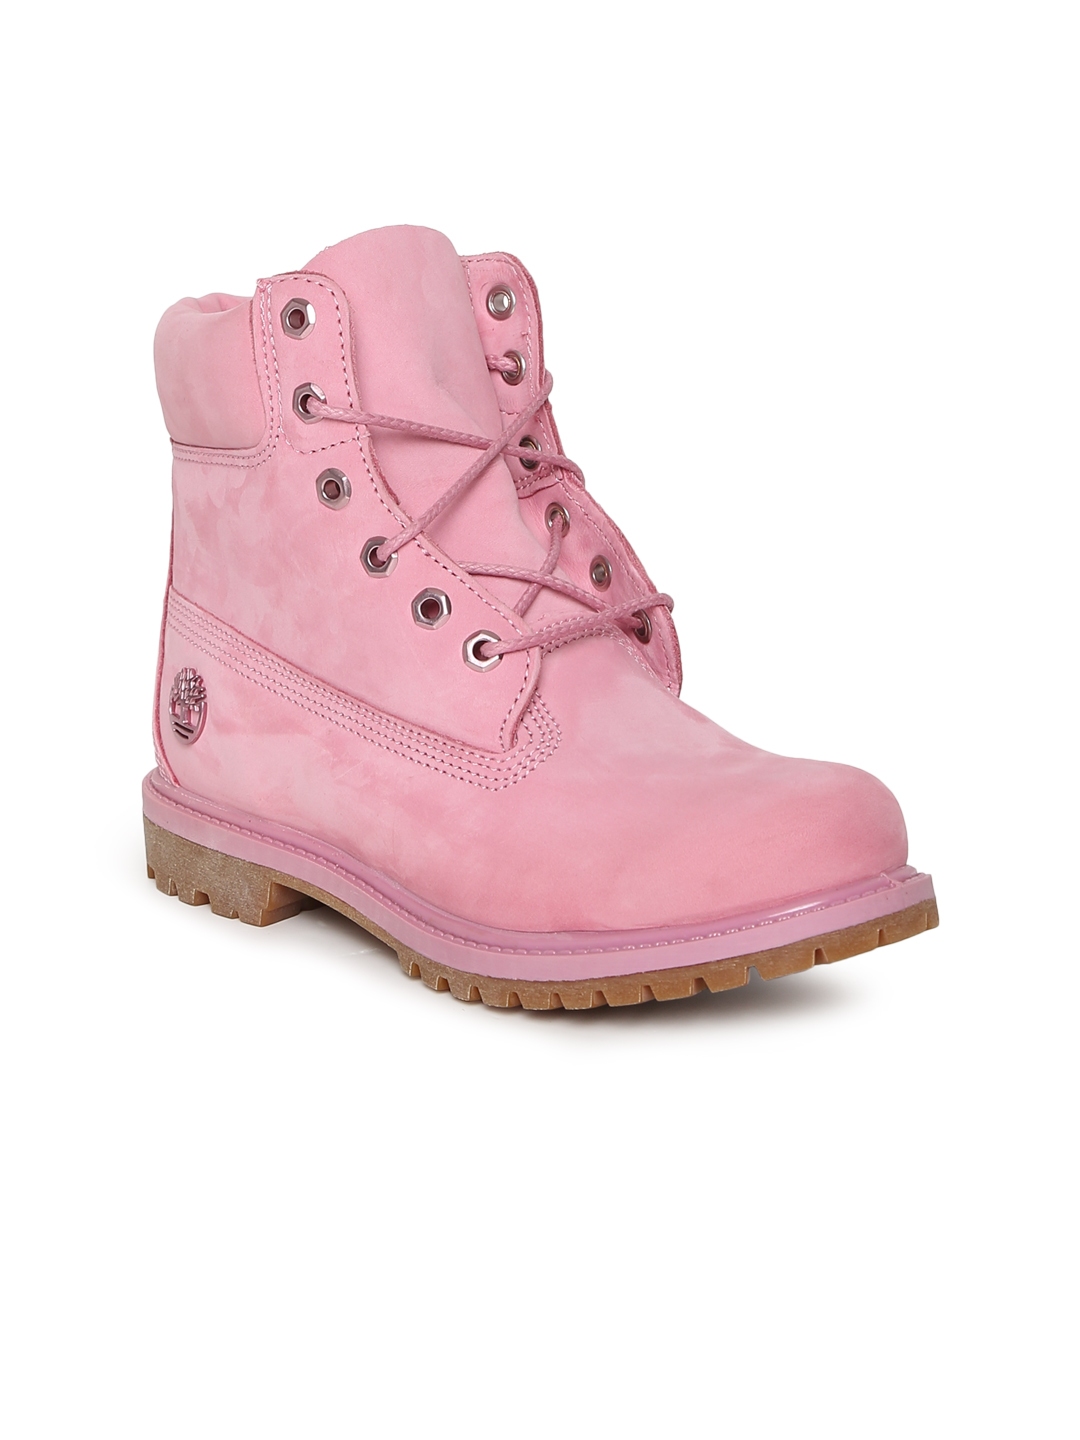 pink timberlands for women